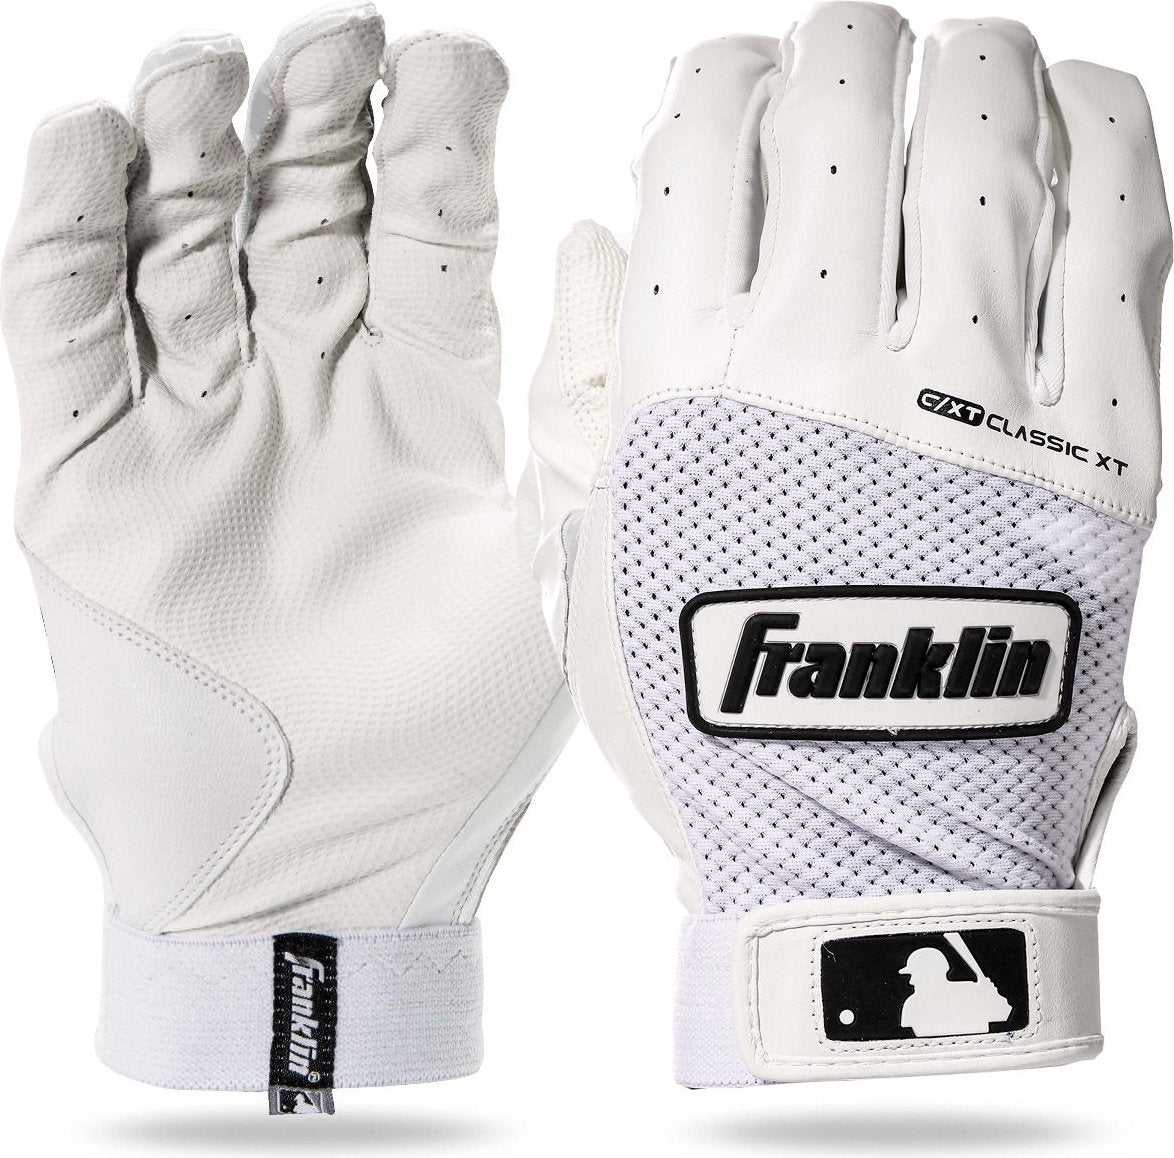 Franklin Classic XT Batting Gloves - White - HIT a Double